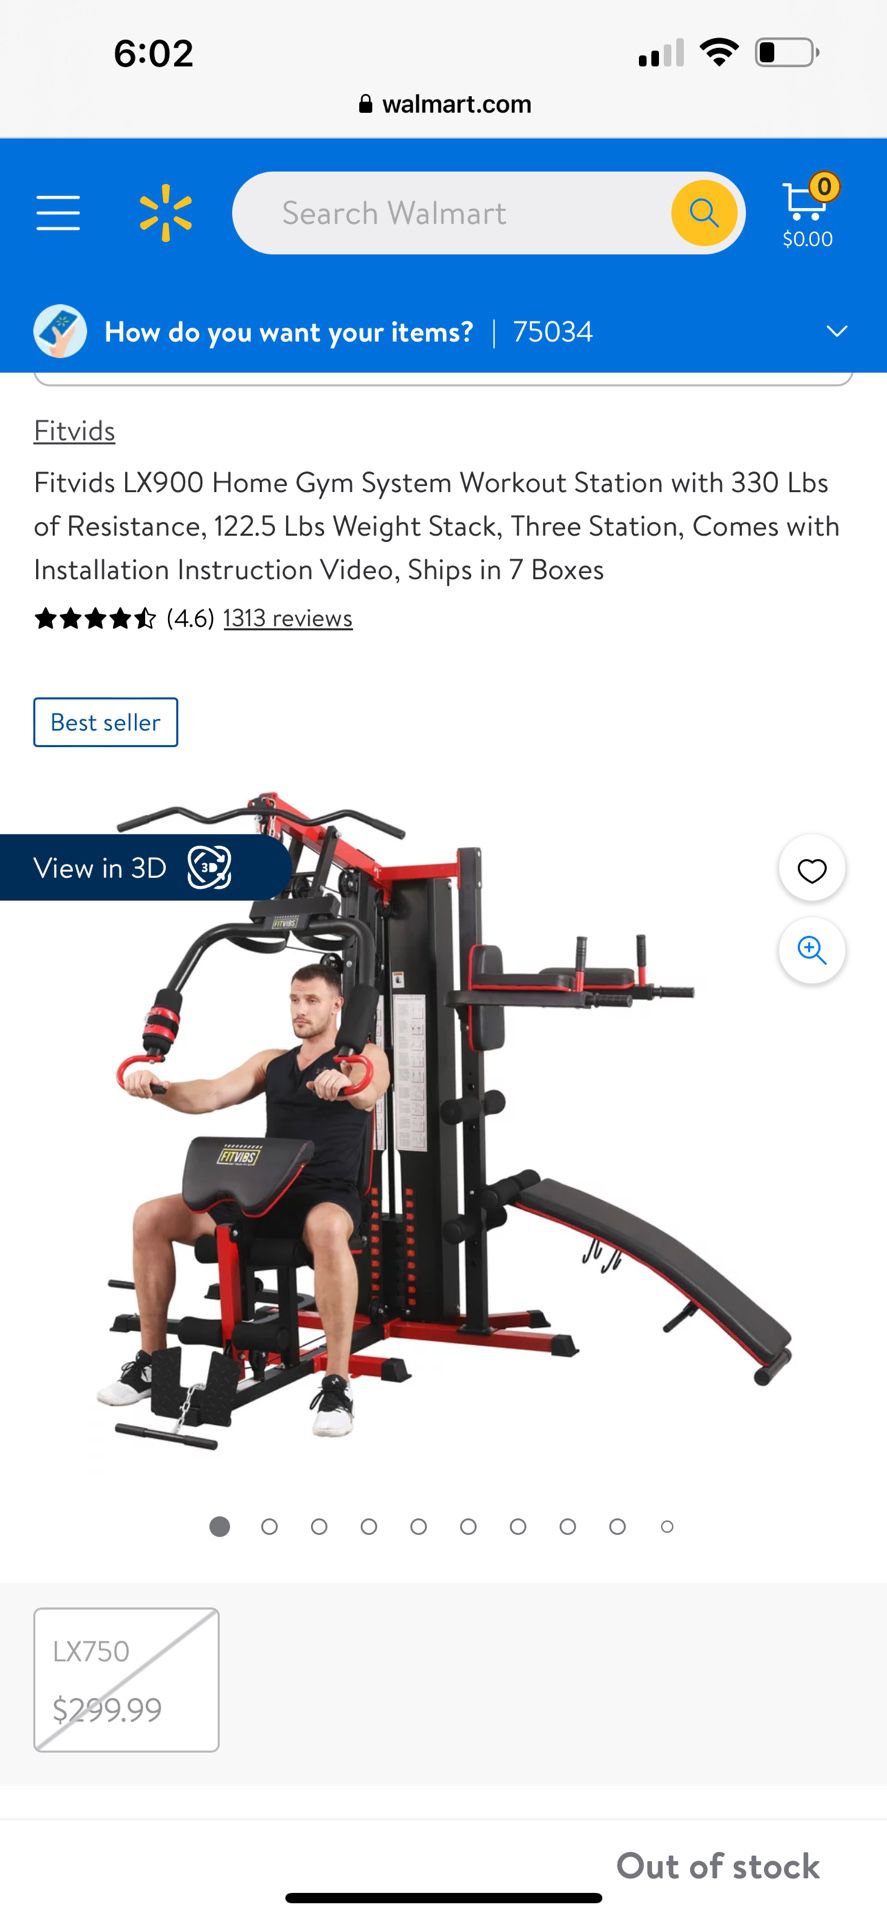 Fitvids LX900 Home Gym System Workout Station with 330 Lbs of Resistance, 122.5 Lbs Weight Stack, Three Station, Comes with Installation Instruction V